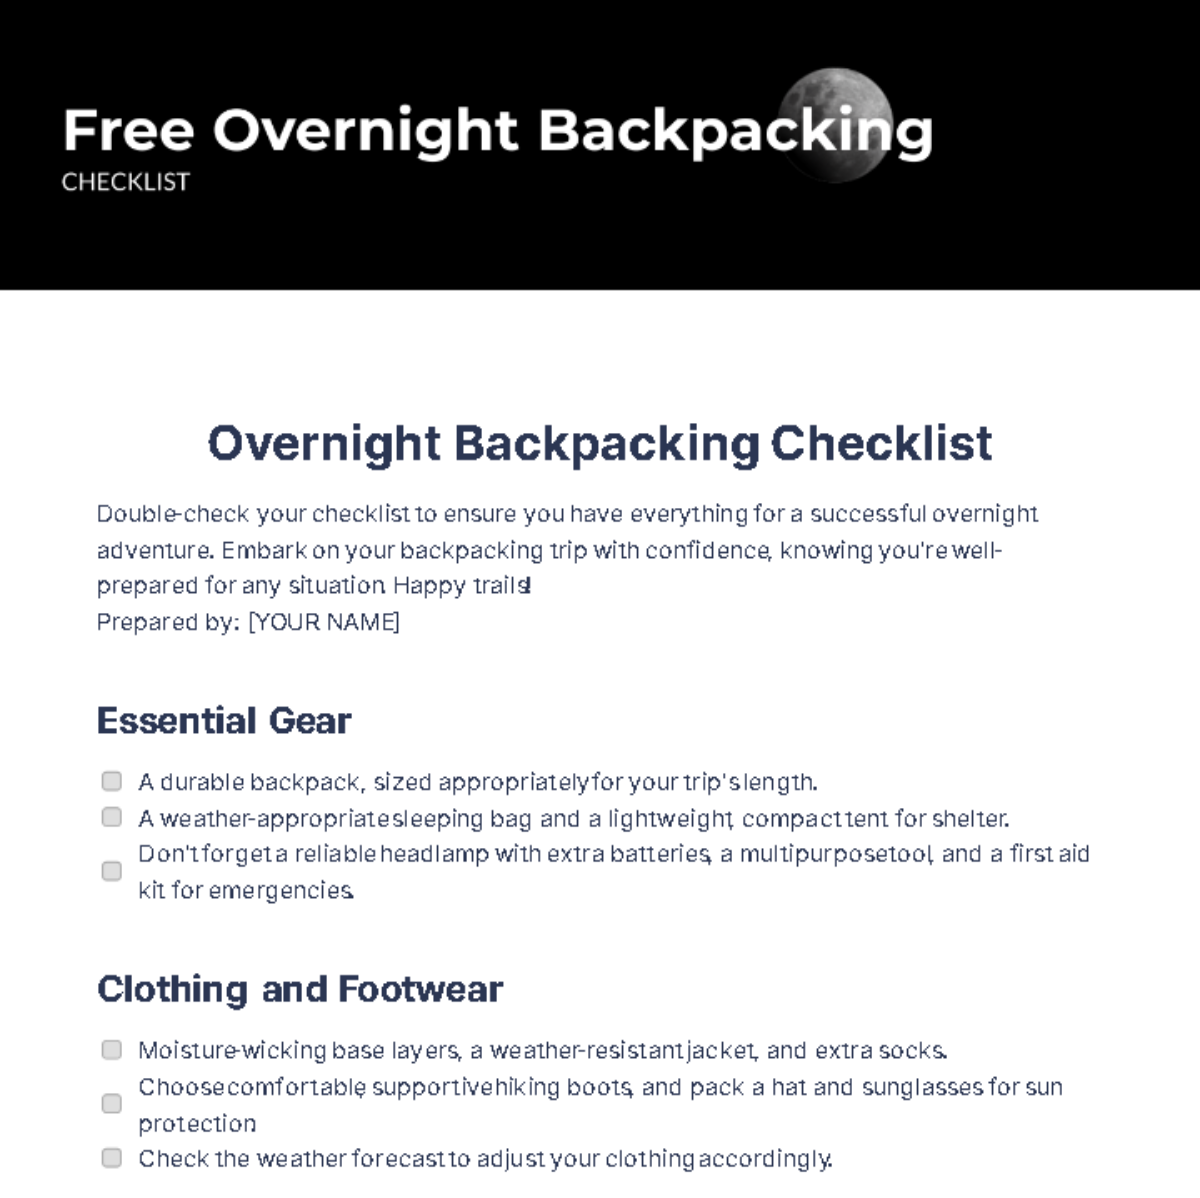 Overnight Backpacking Checklist Template